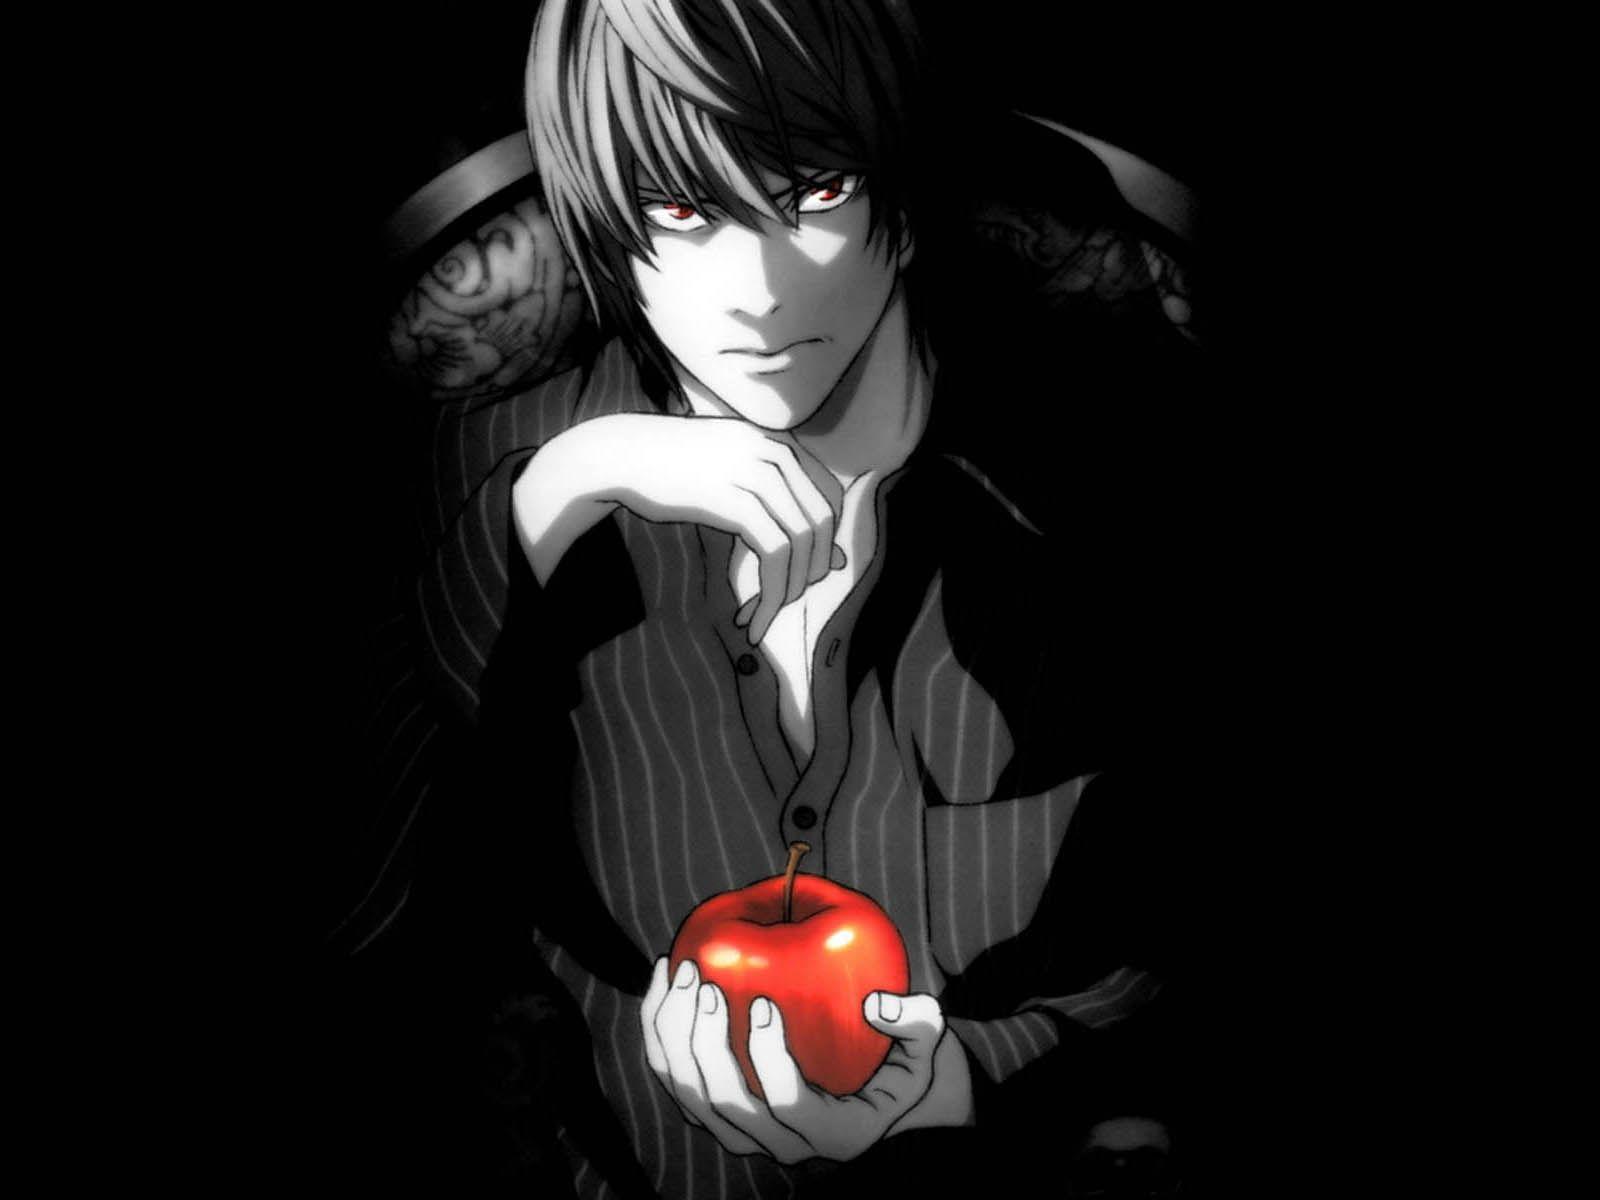 Kira with Deathnote book Wallpaper Download